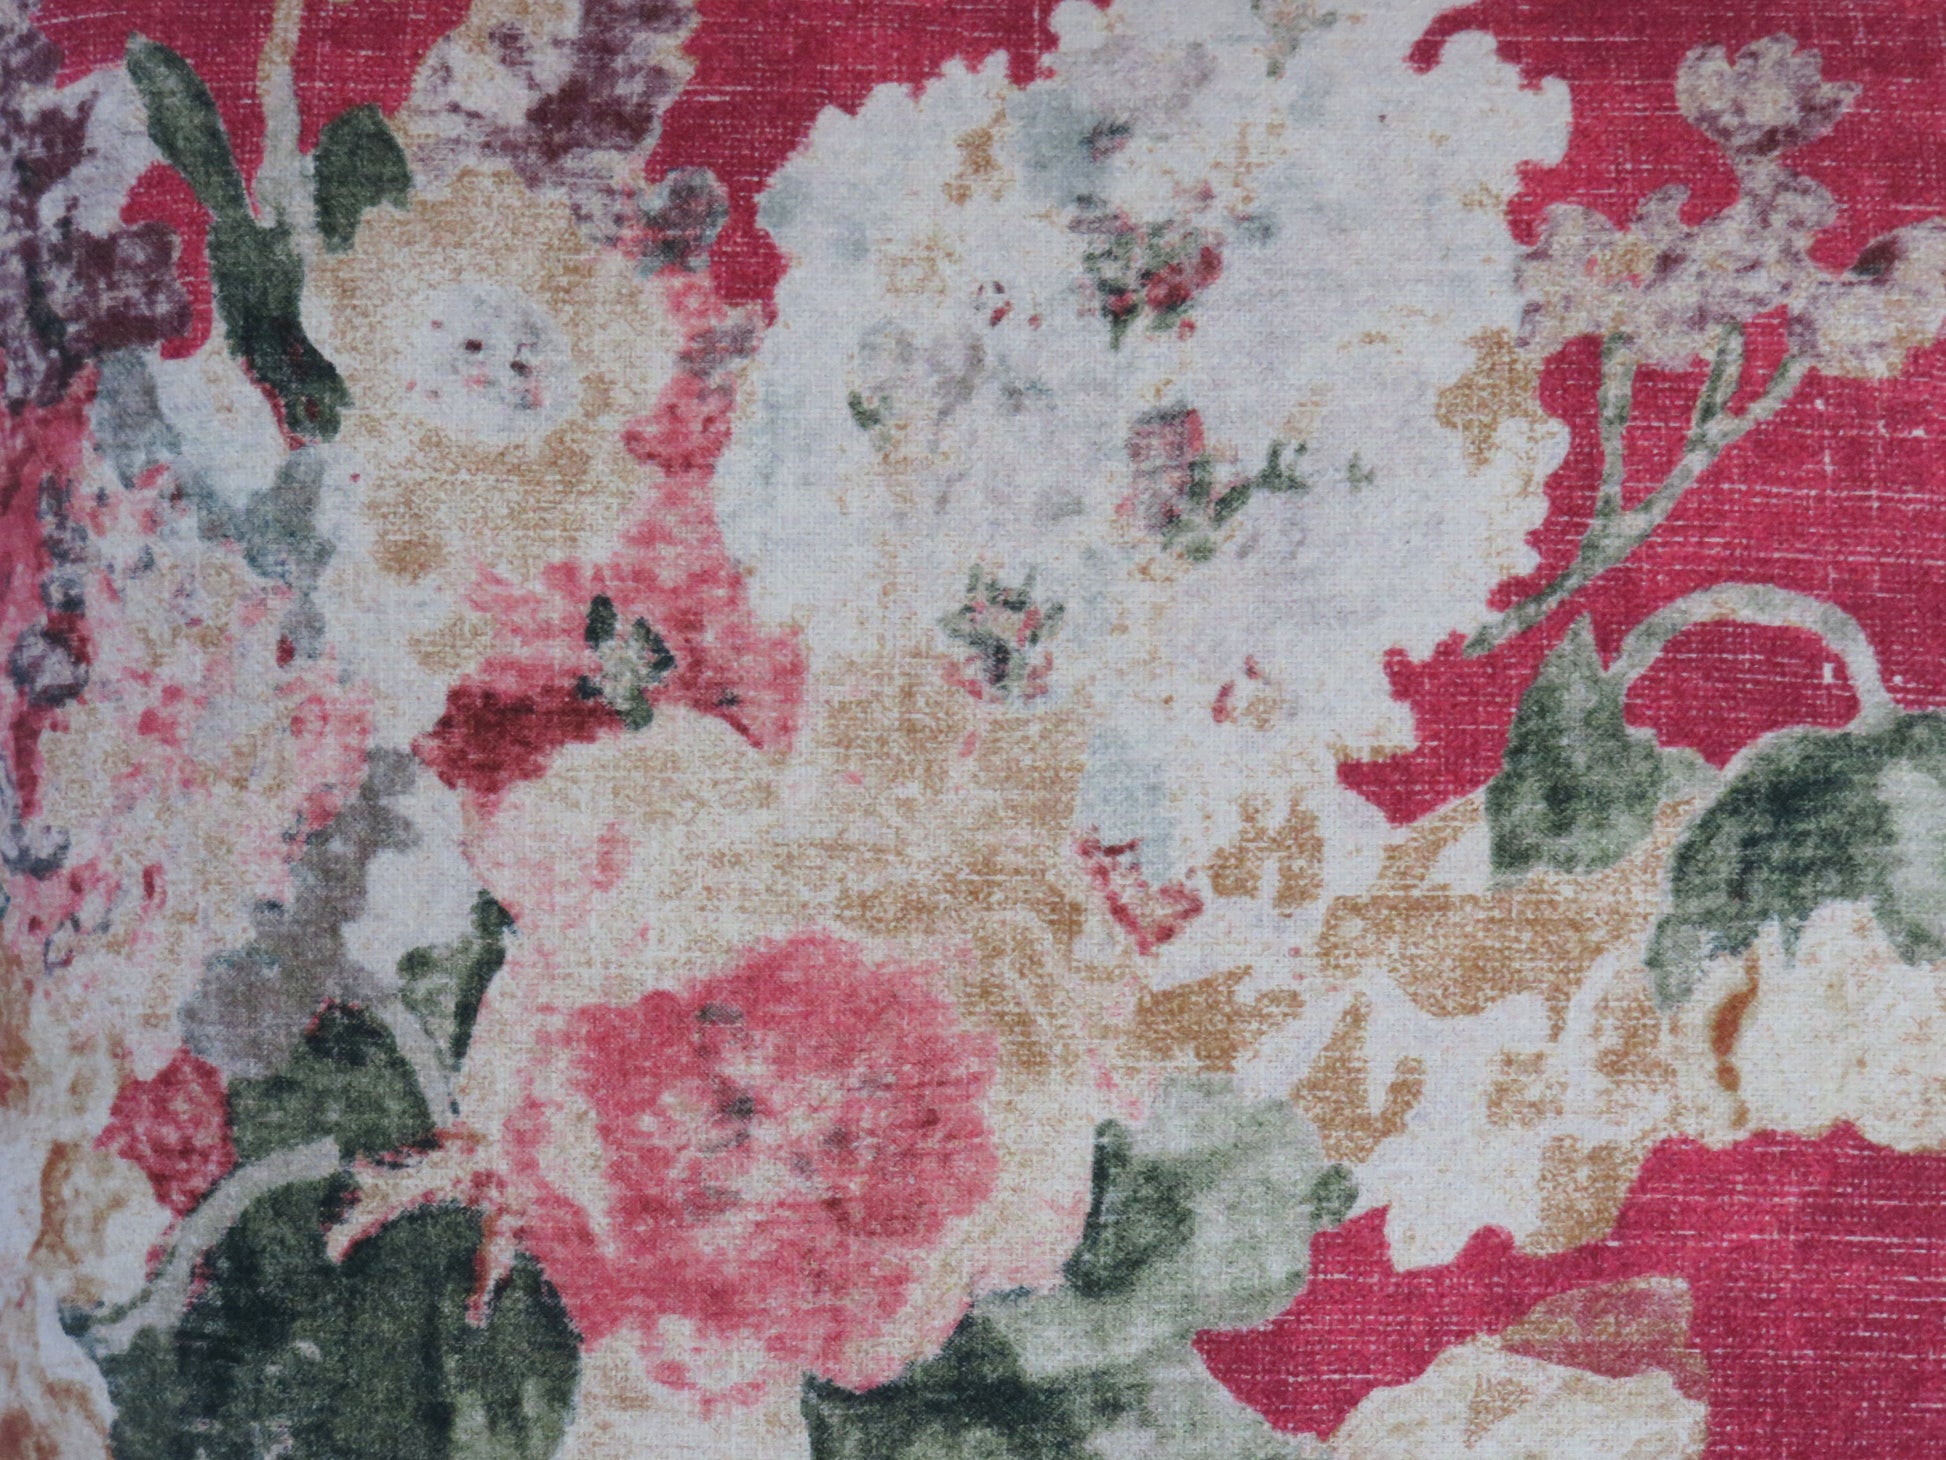 cherry red watercolor floral pillow cover